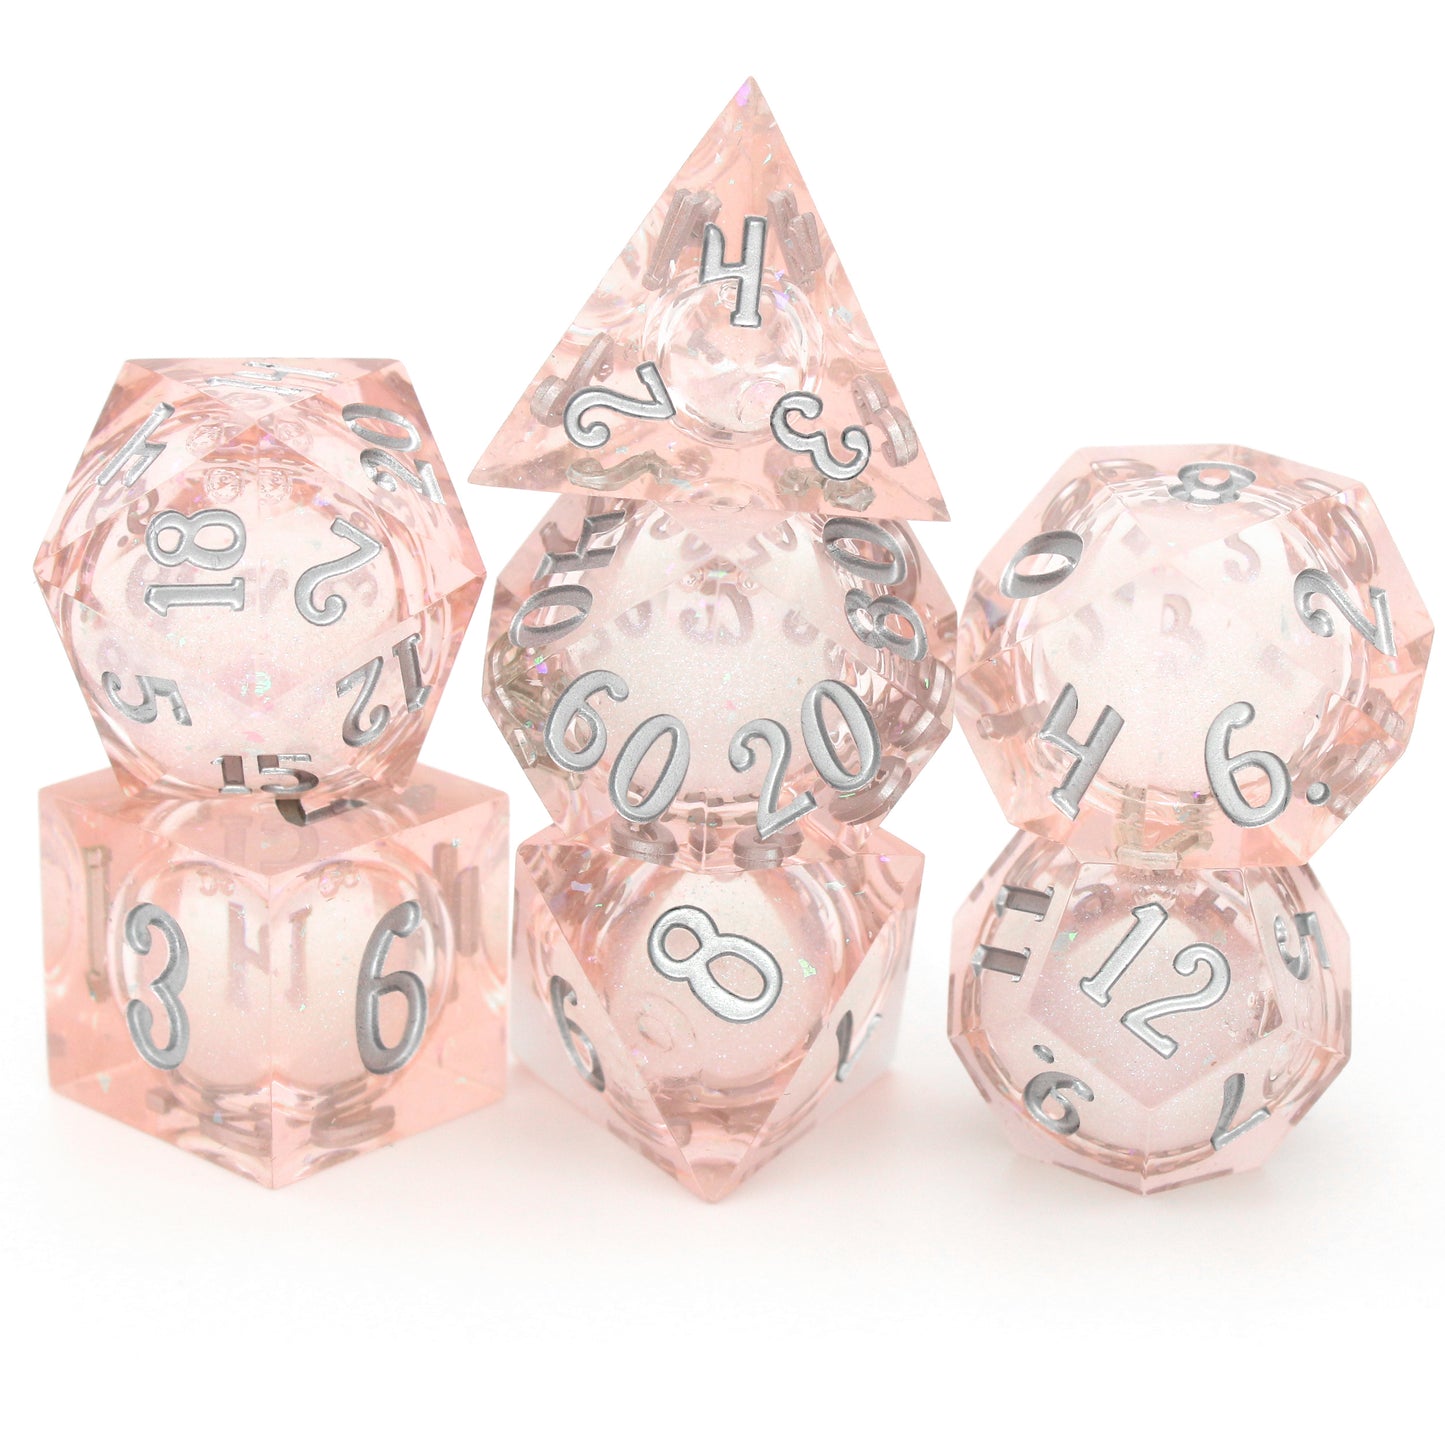 Unicorn Daydreams is a 7-piece, translucent light pink, sharp edge resin dice set with a liquid core of color-shifting pearlescent glitter, inked in silver.